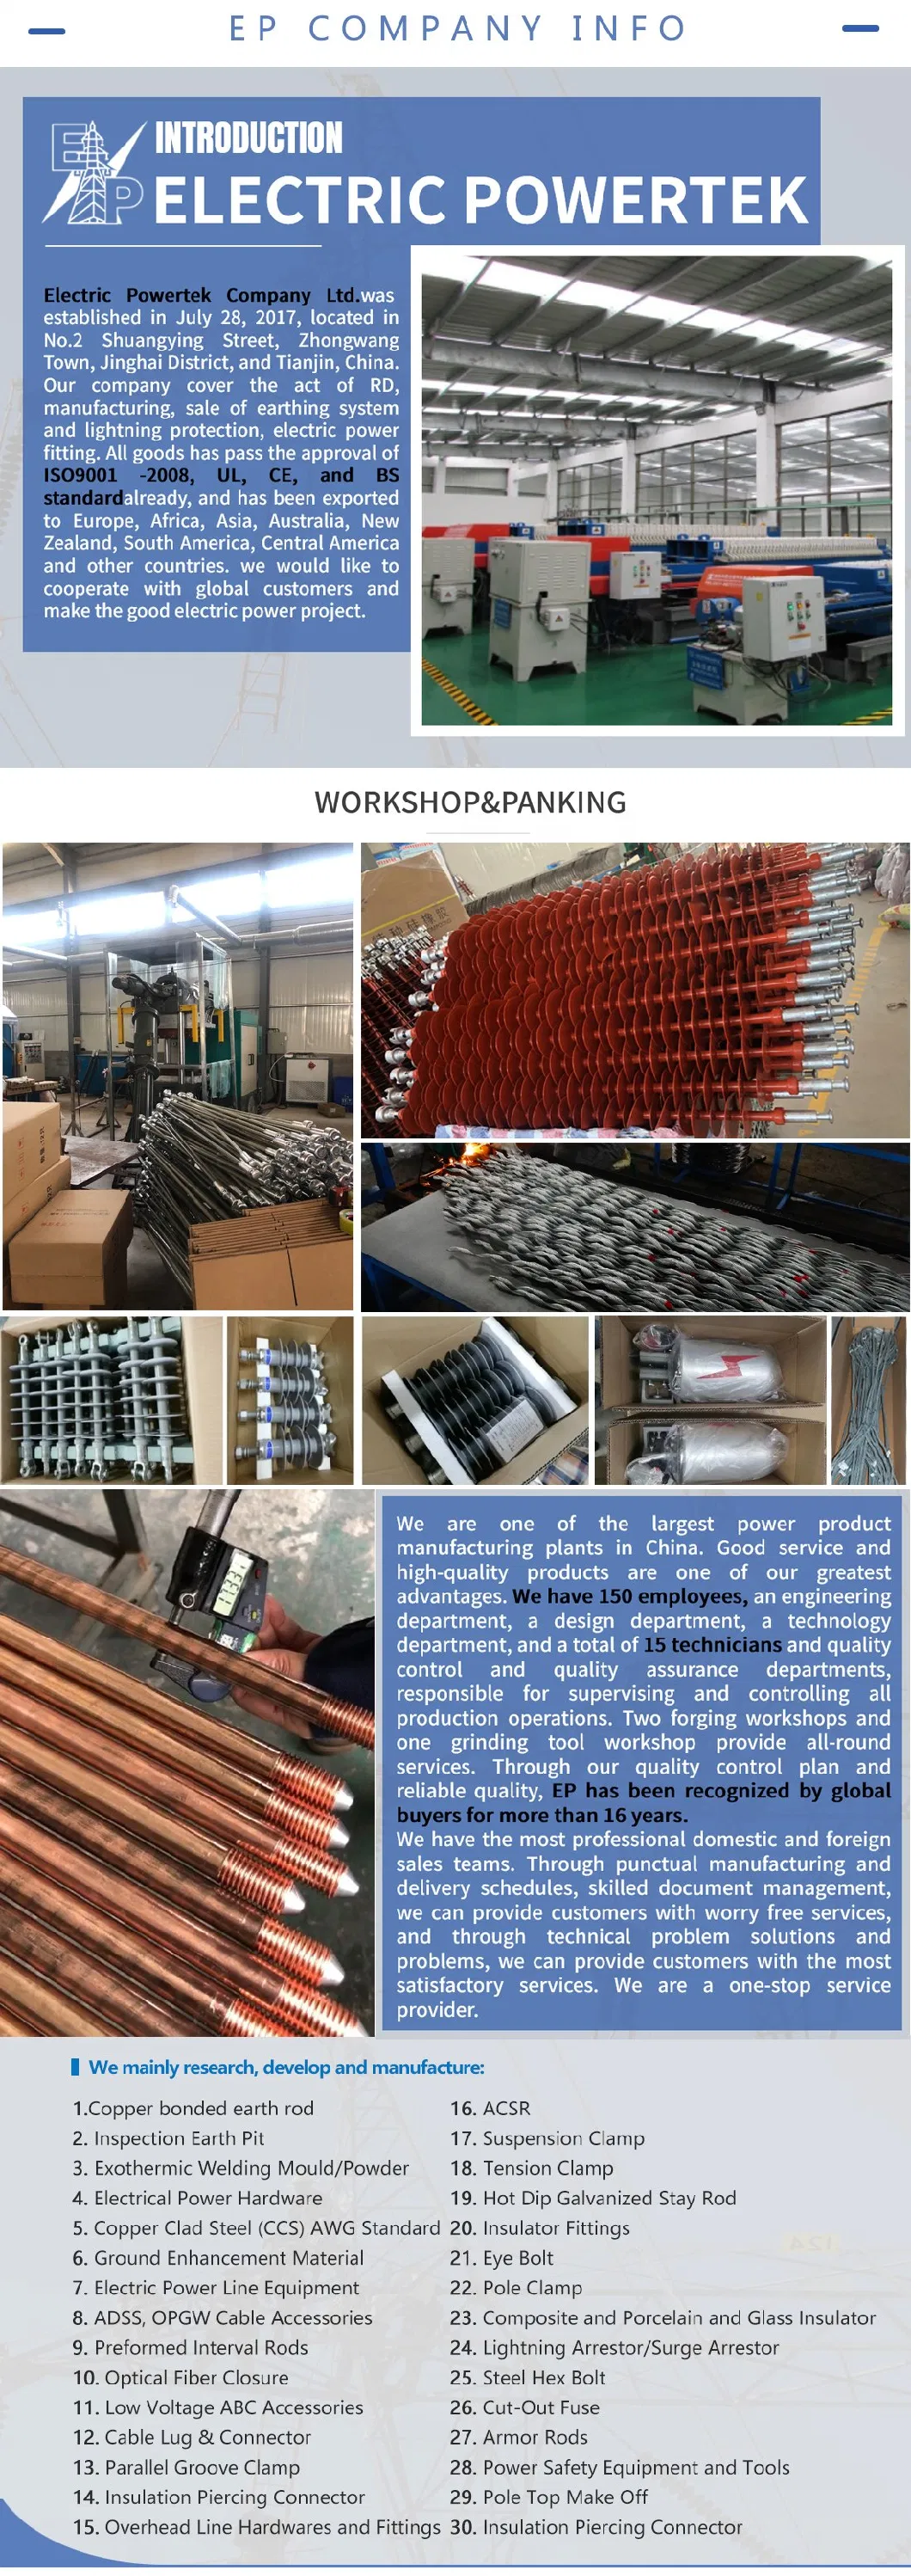 Customized Cable Storage Assembly Opgw ADSS Cable Accessories